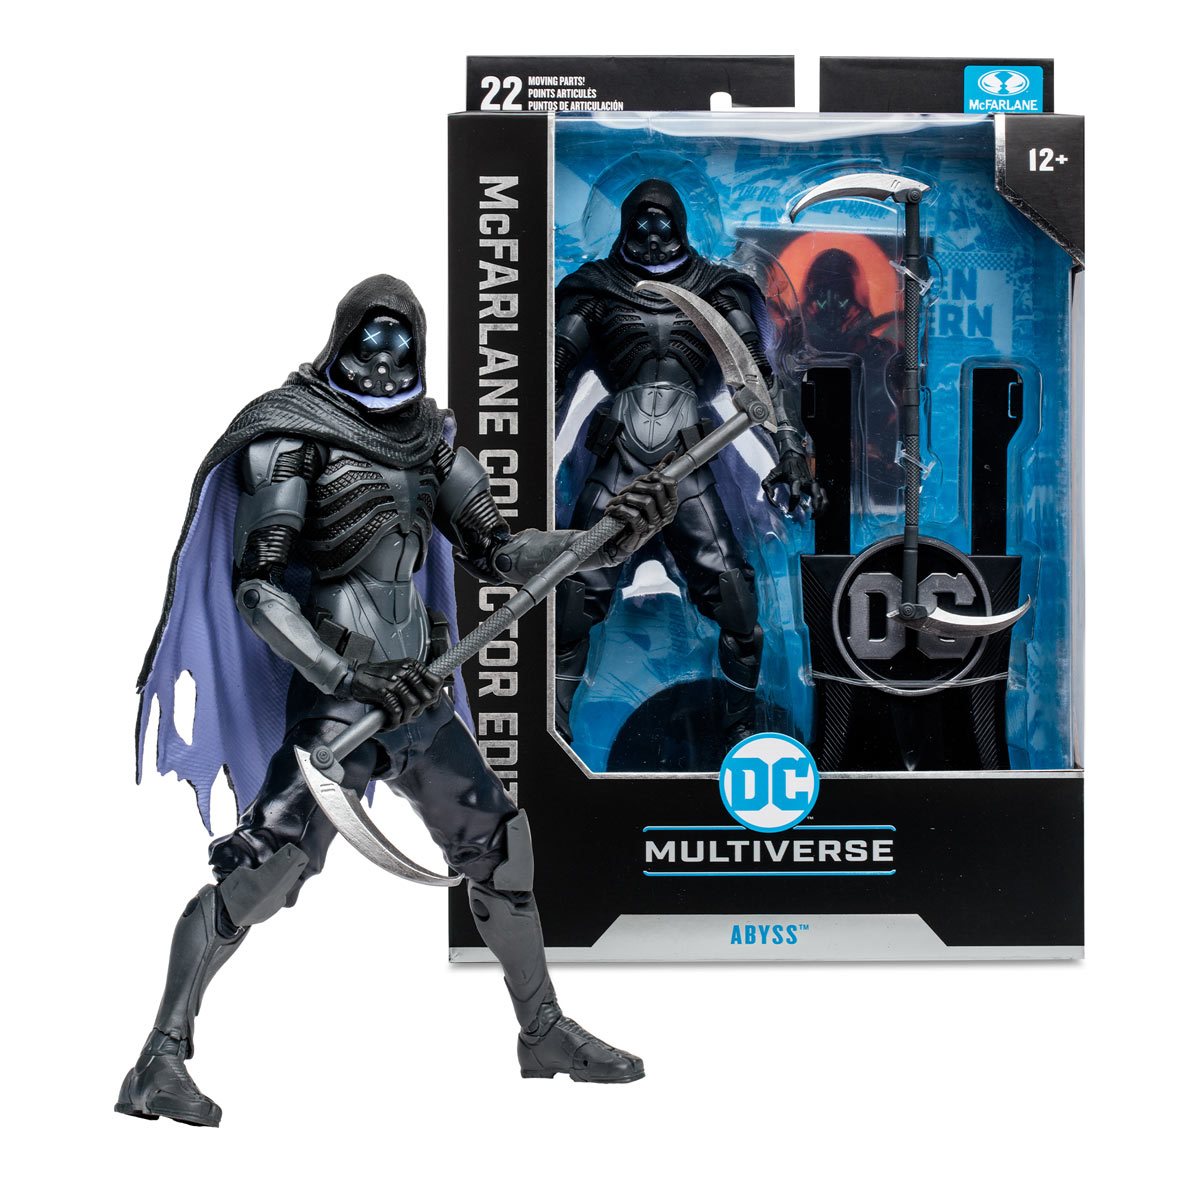 DC McFarlane Collector Edition Wave 1 Abyss Batman vs. Abyss - Heretoserveyou